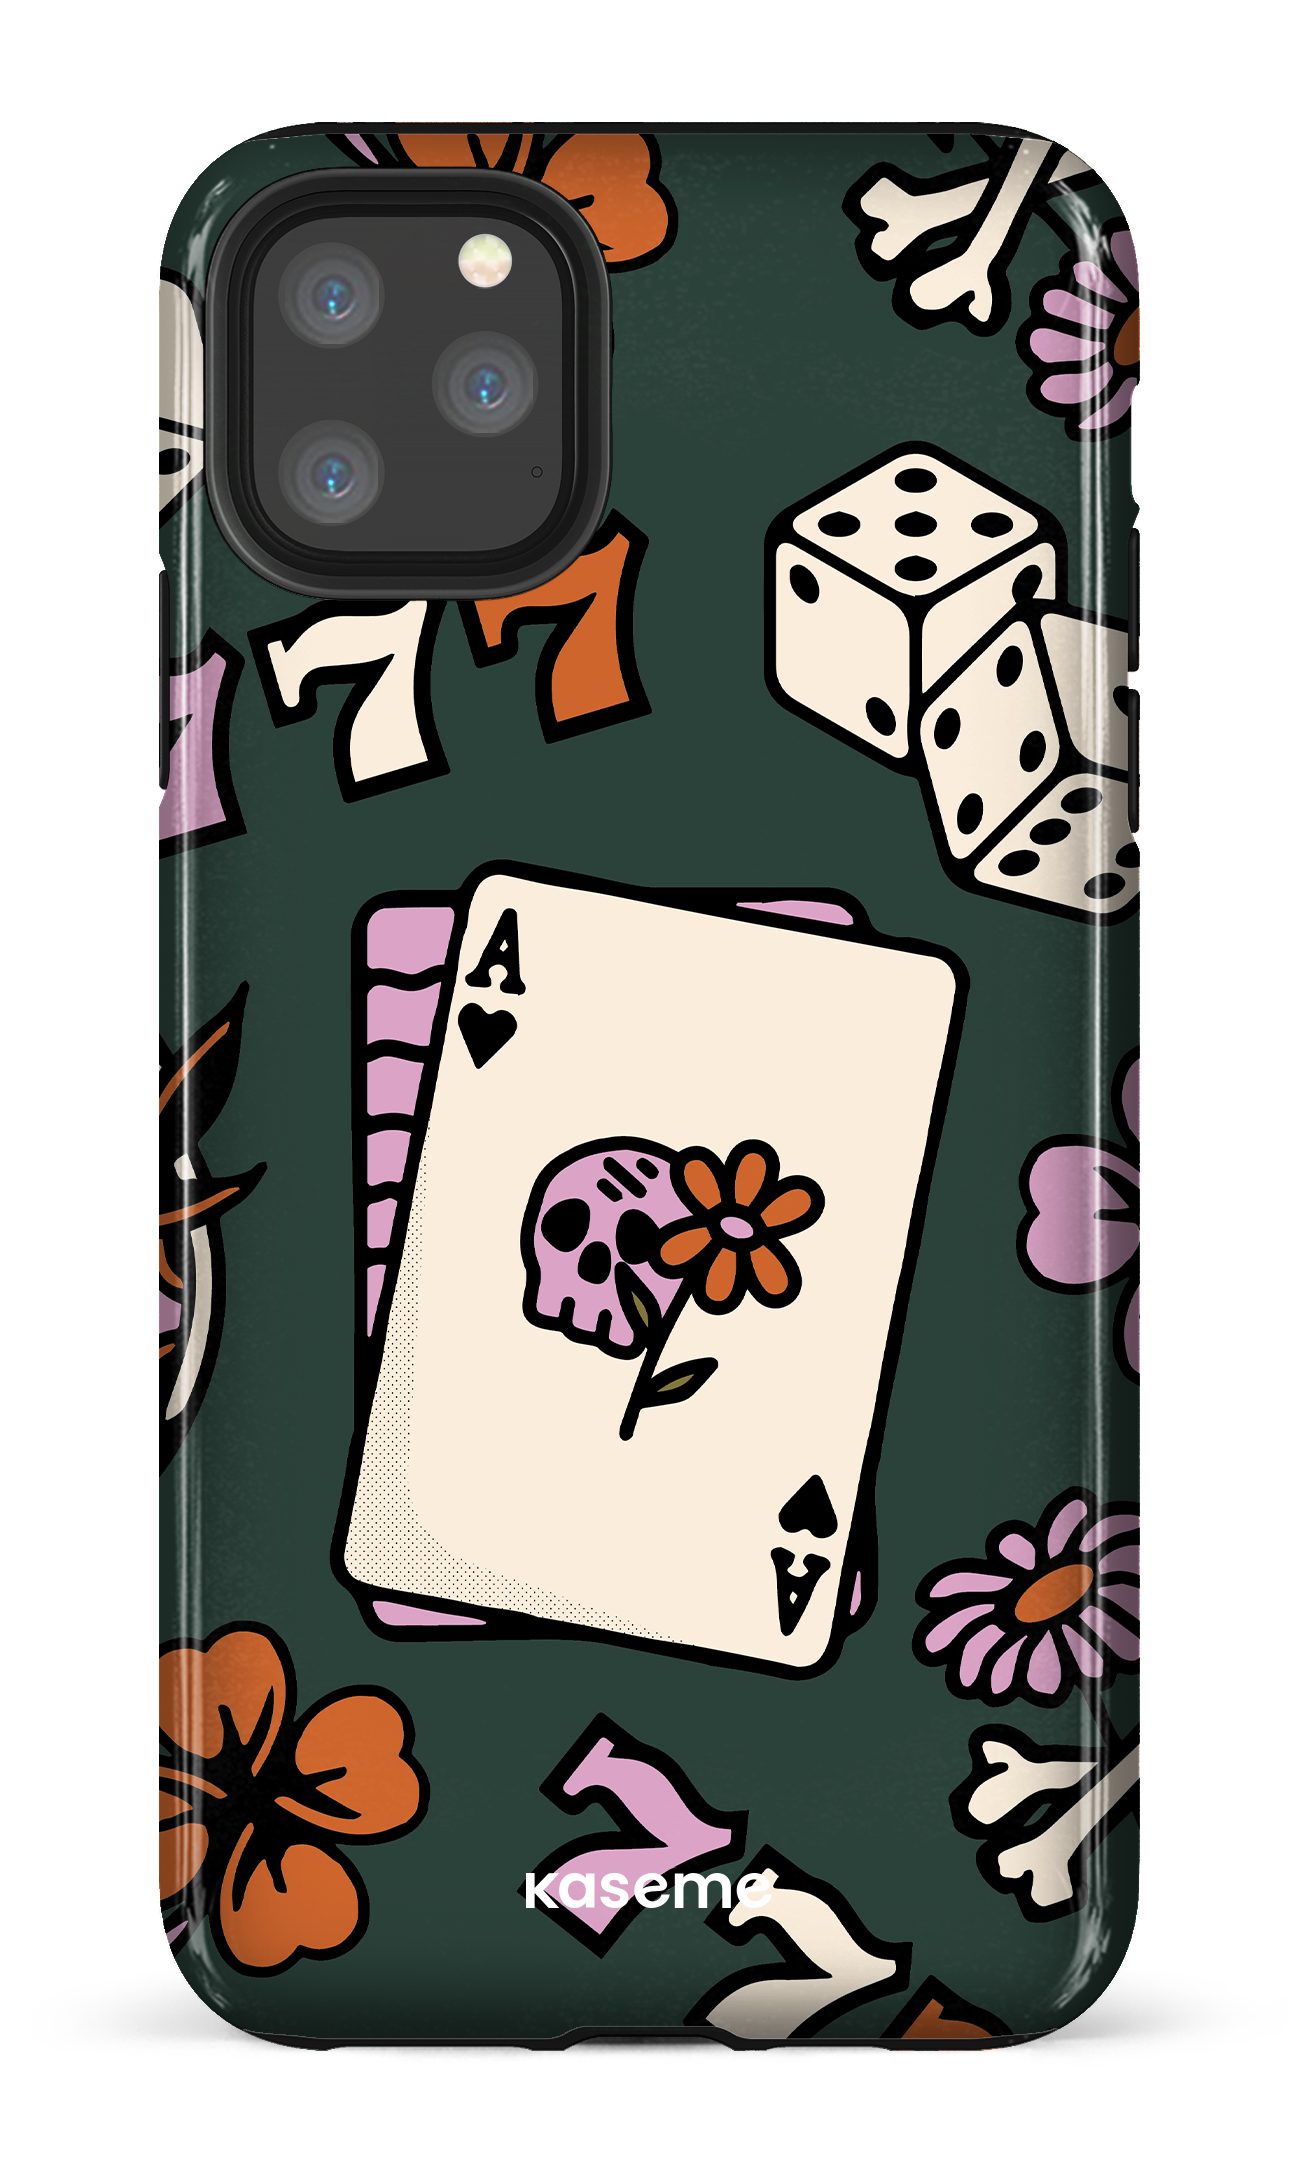 Poker Face - iPhone 11 Pro Max